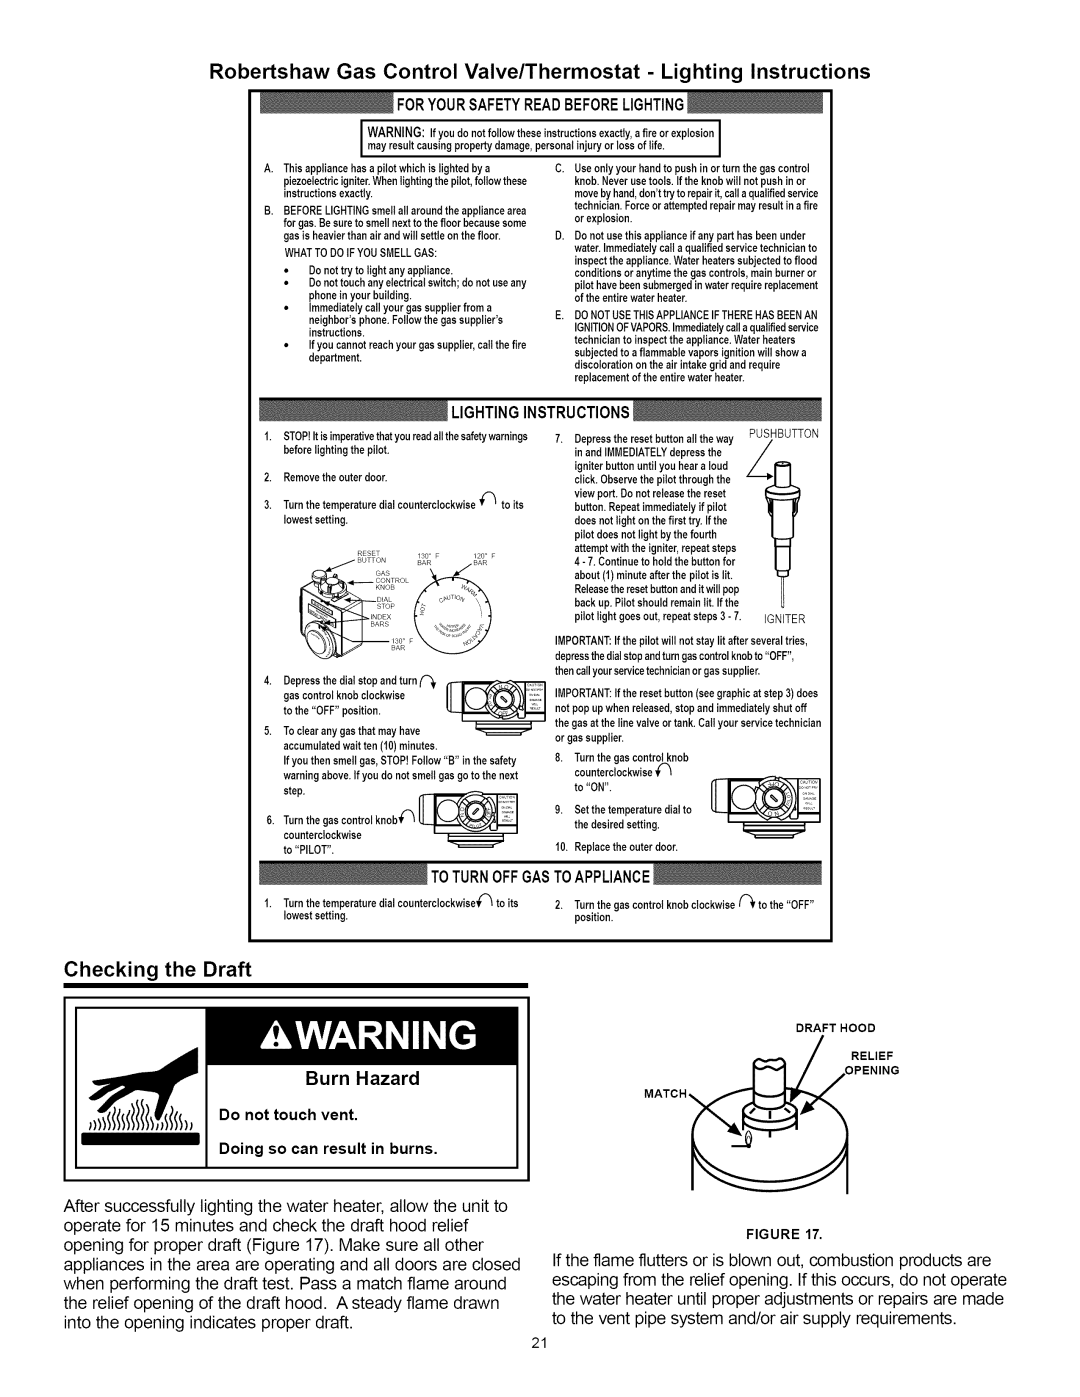 A.O. Smith Water Heater Robertshaw Gas Control Valve/Thermostat - Lighting Instructions, Checking the Draft, Burn Hazard 